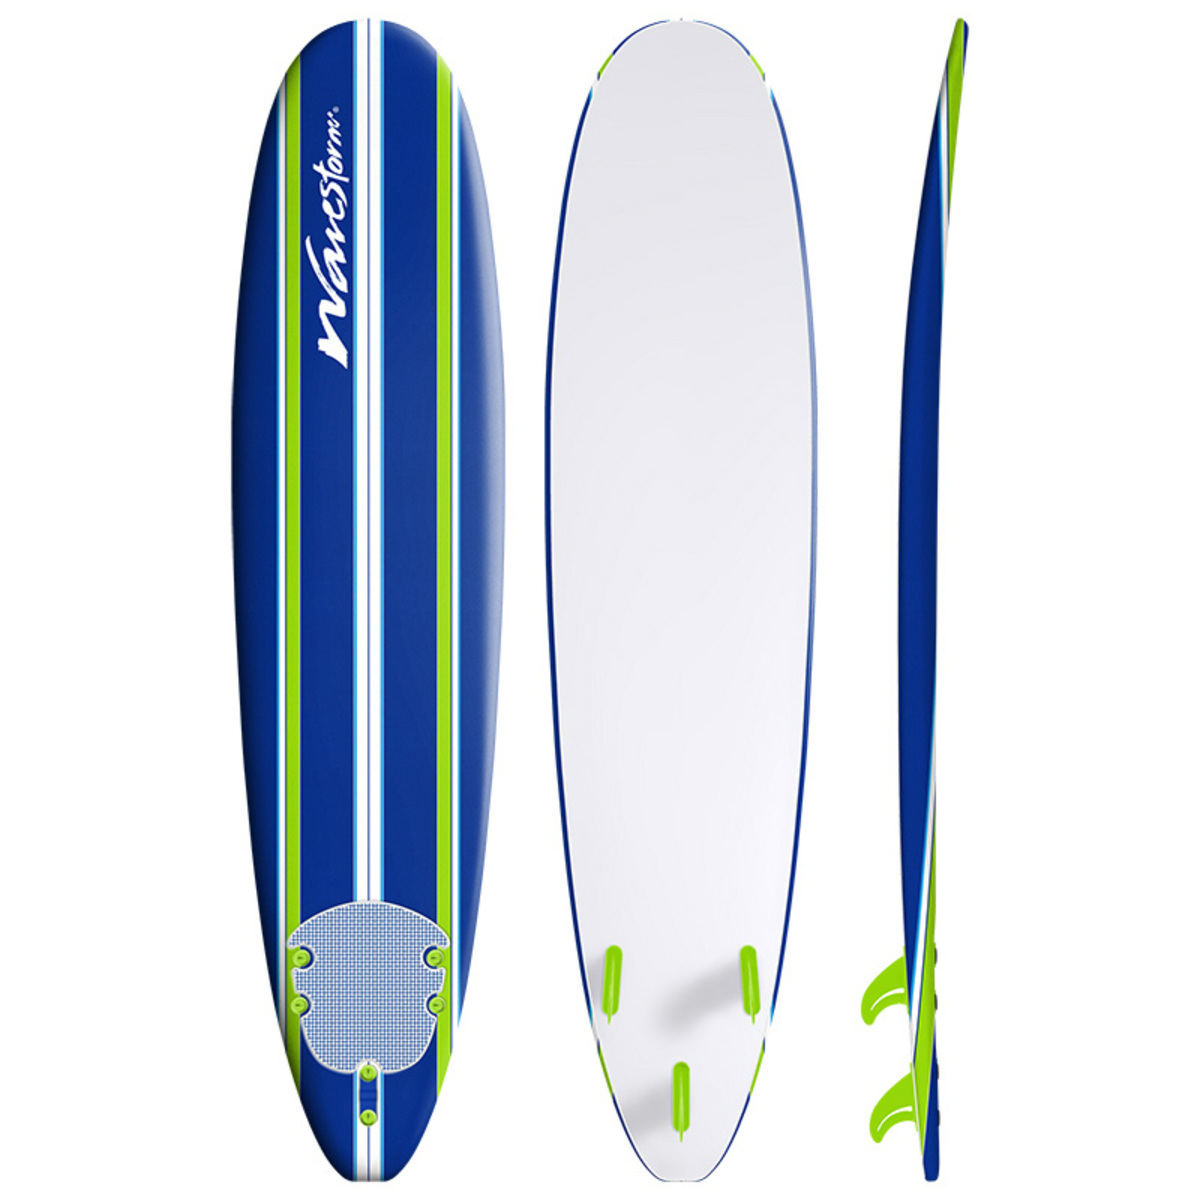 Wavestorm 8ft Classic Surfboard in Blue, Lime and White Stripe